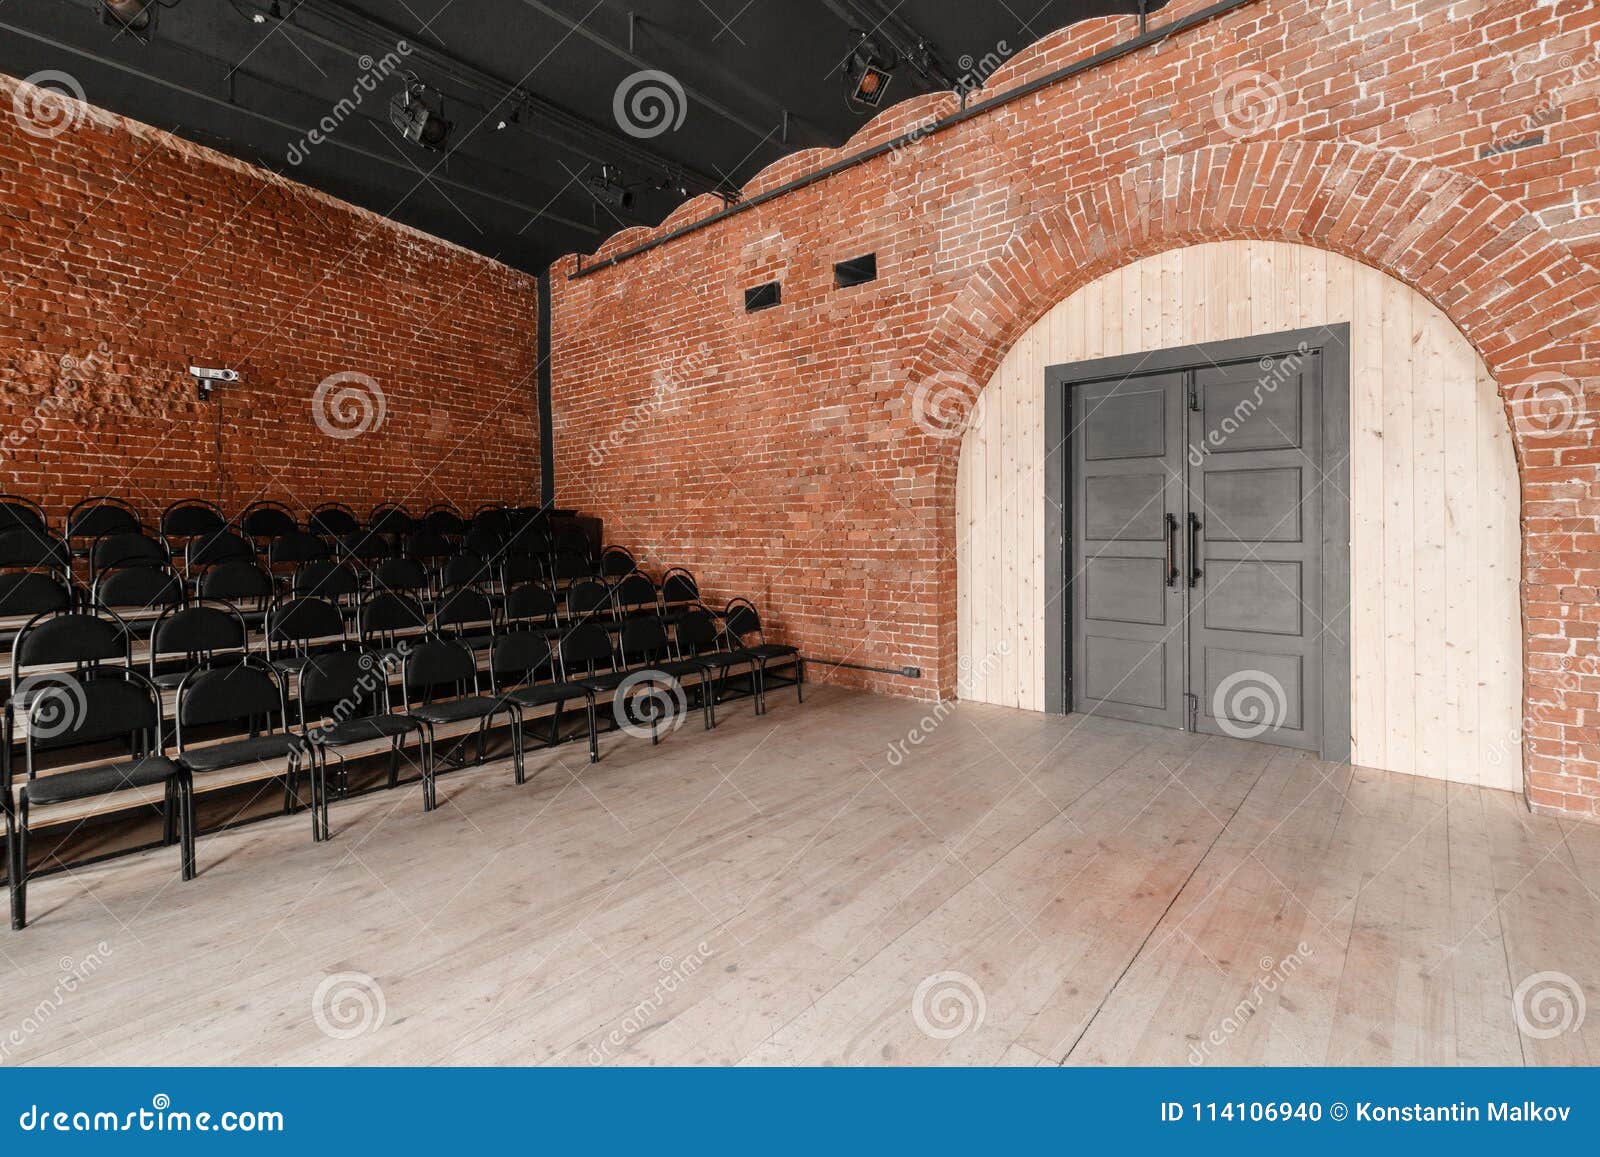 Large Door. Loft Style. Hall With Black Chairs For